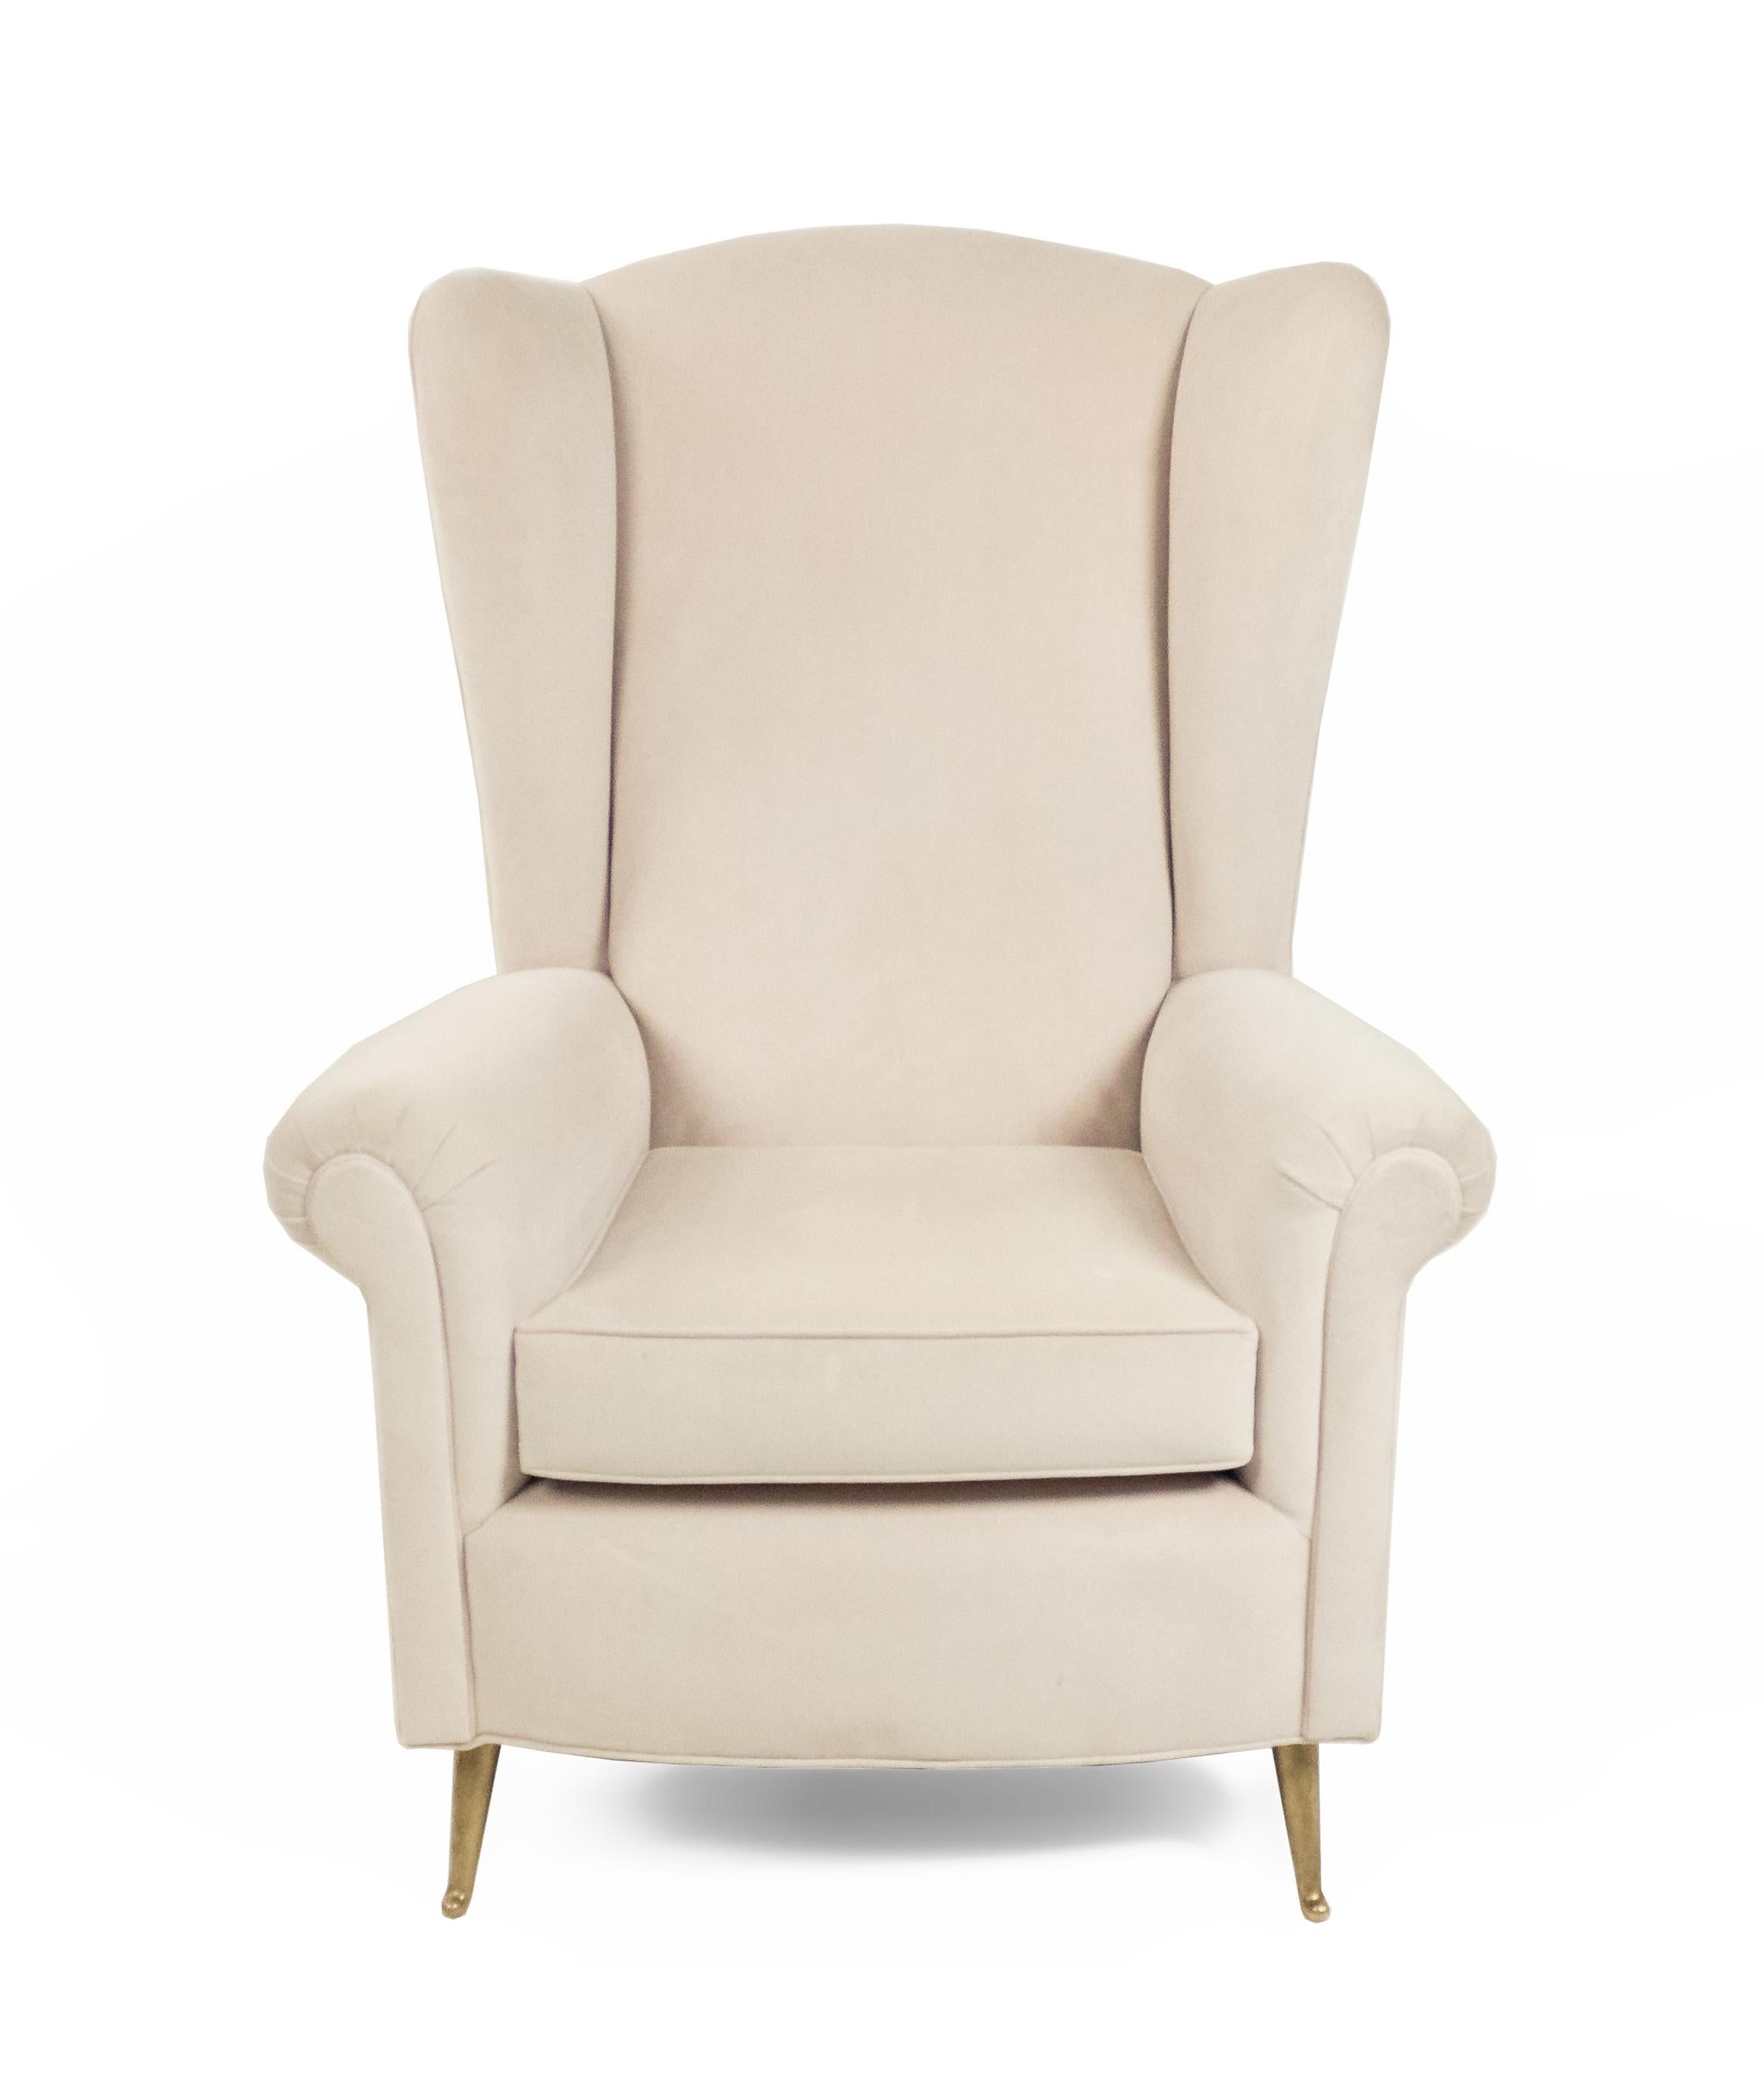 pair of wingback chairs for sale